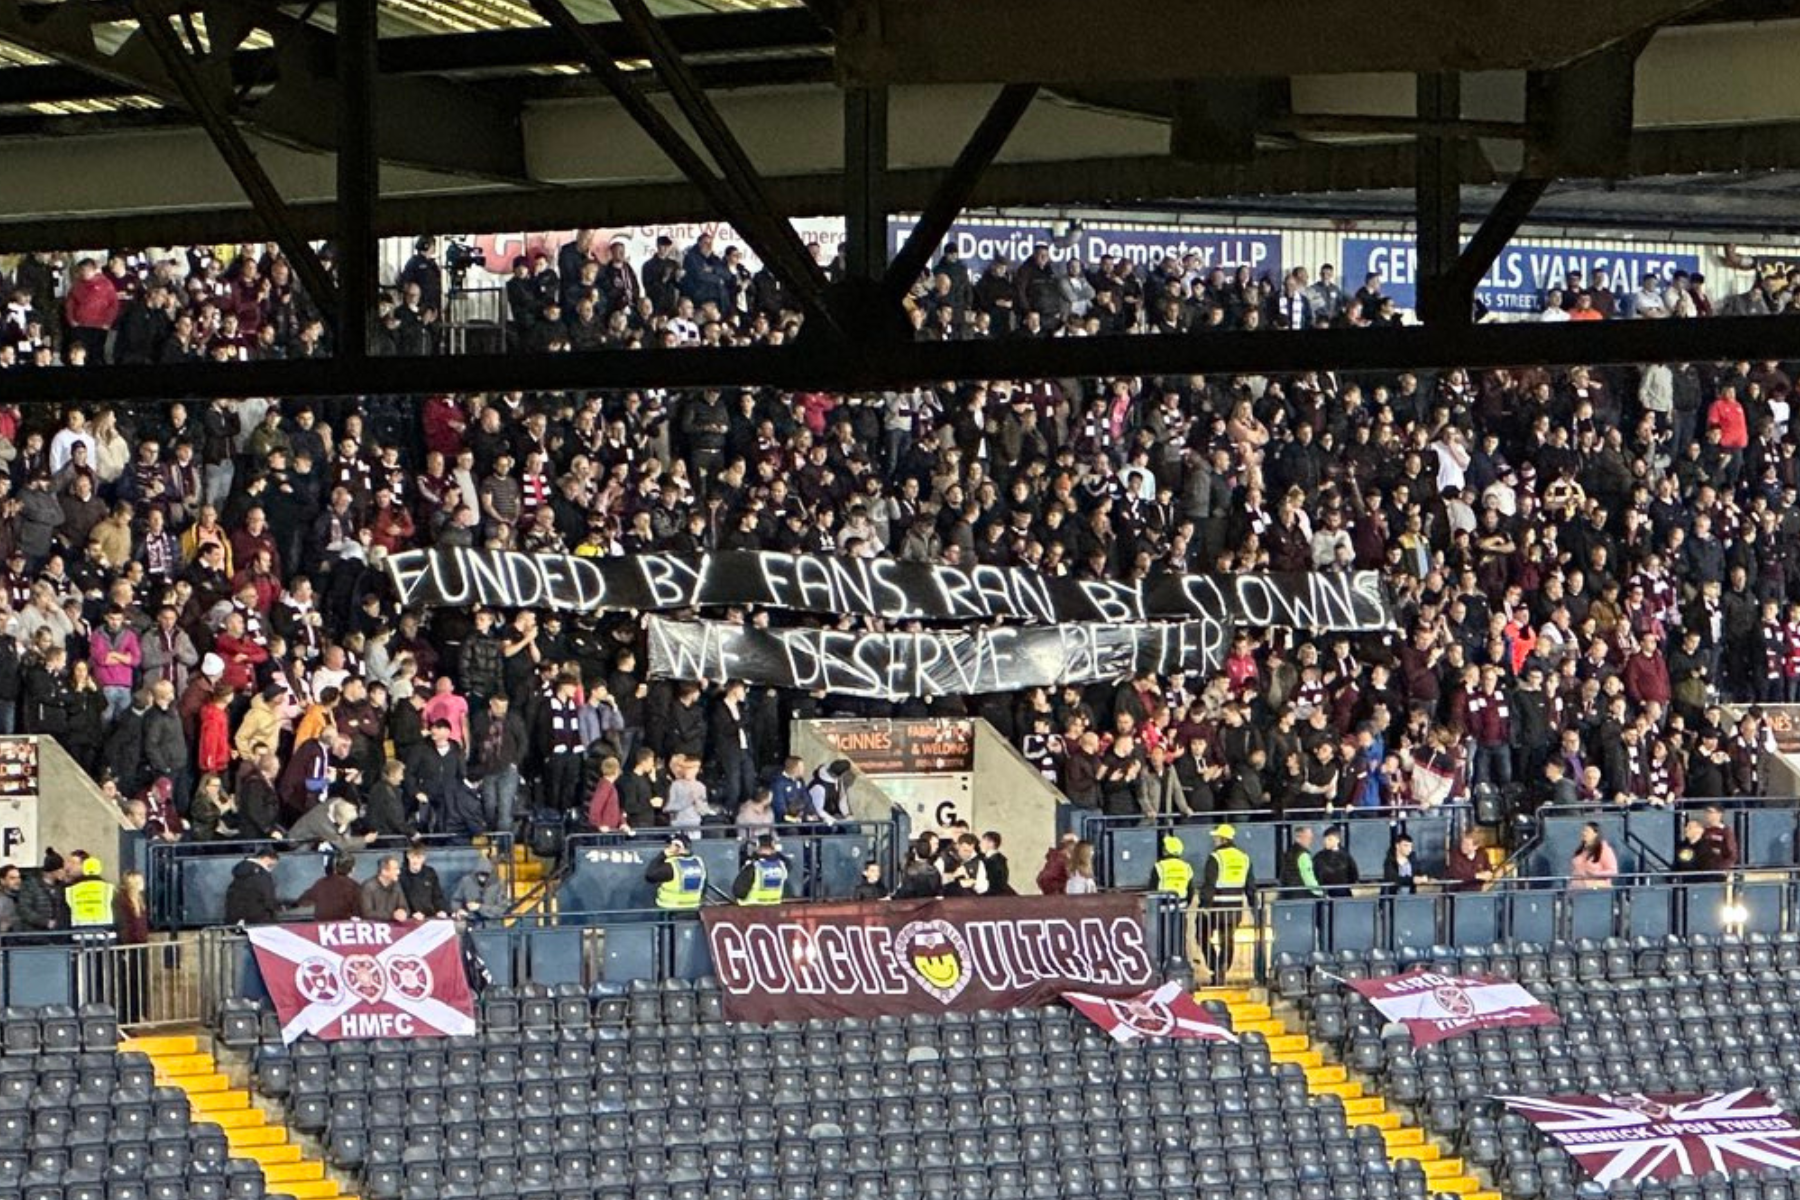 Hearts supporters in furious 'we deserve better' banner blast